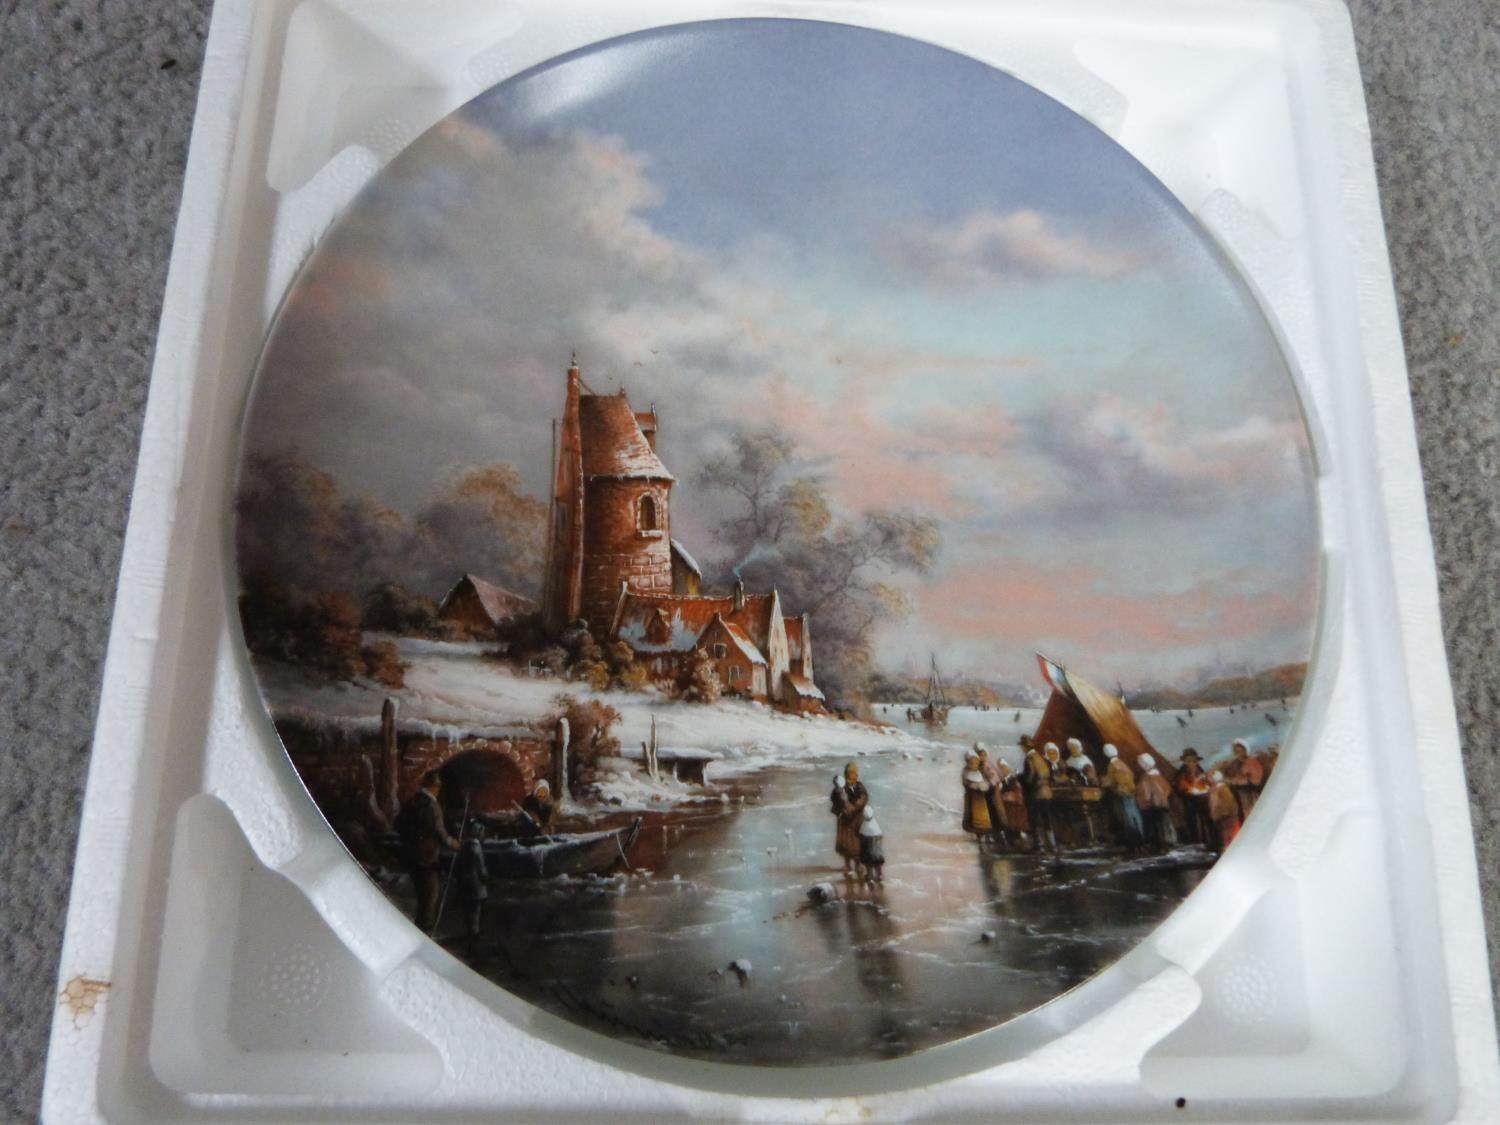 Four limited edition German porcelain plates with original boxes and certificates of authenticity. - Image 6 of 11